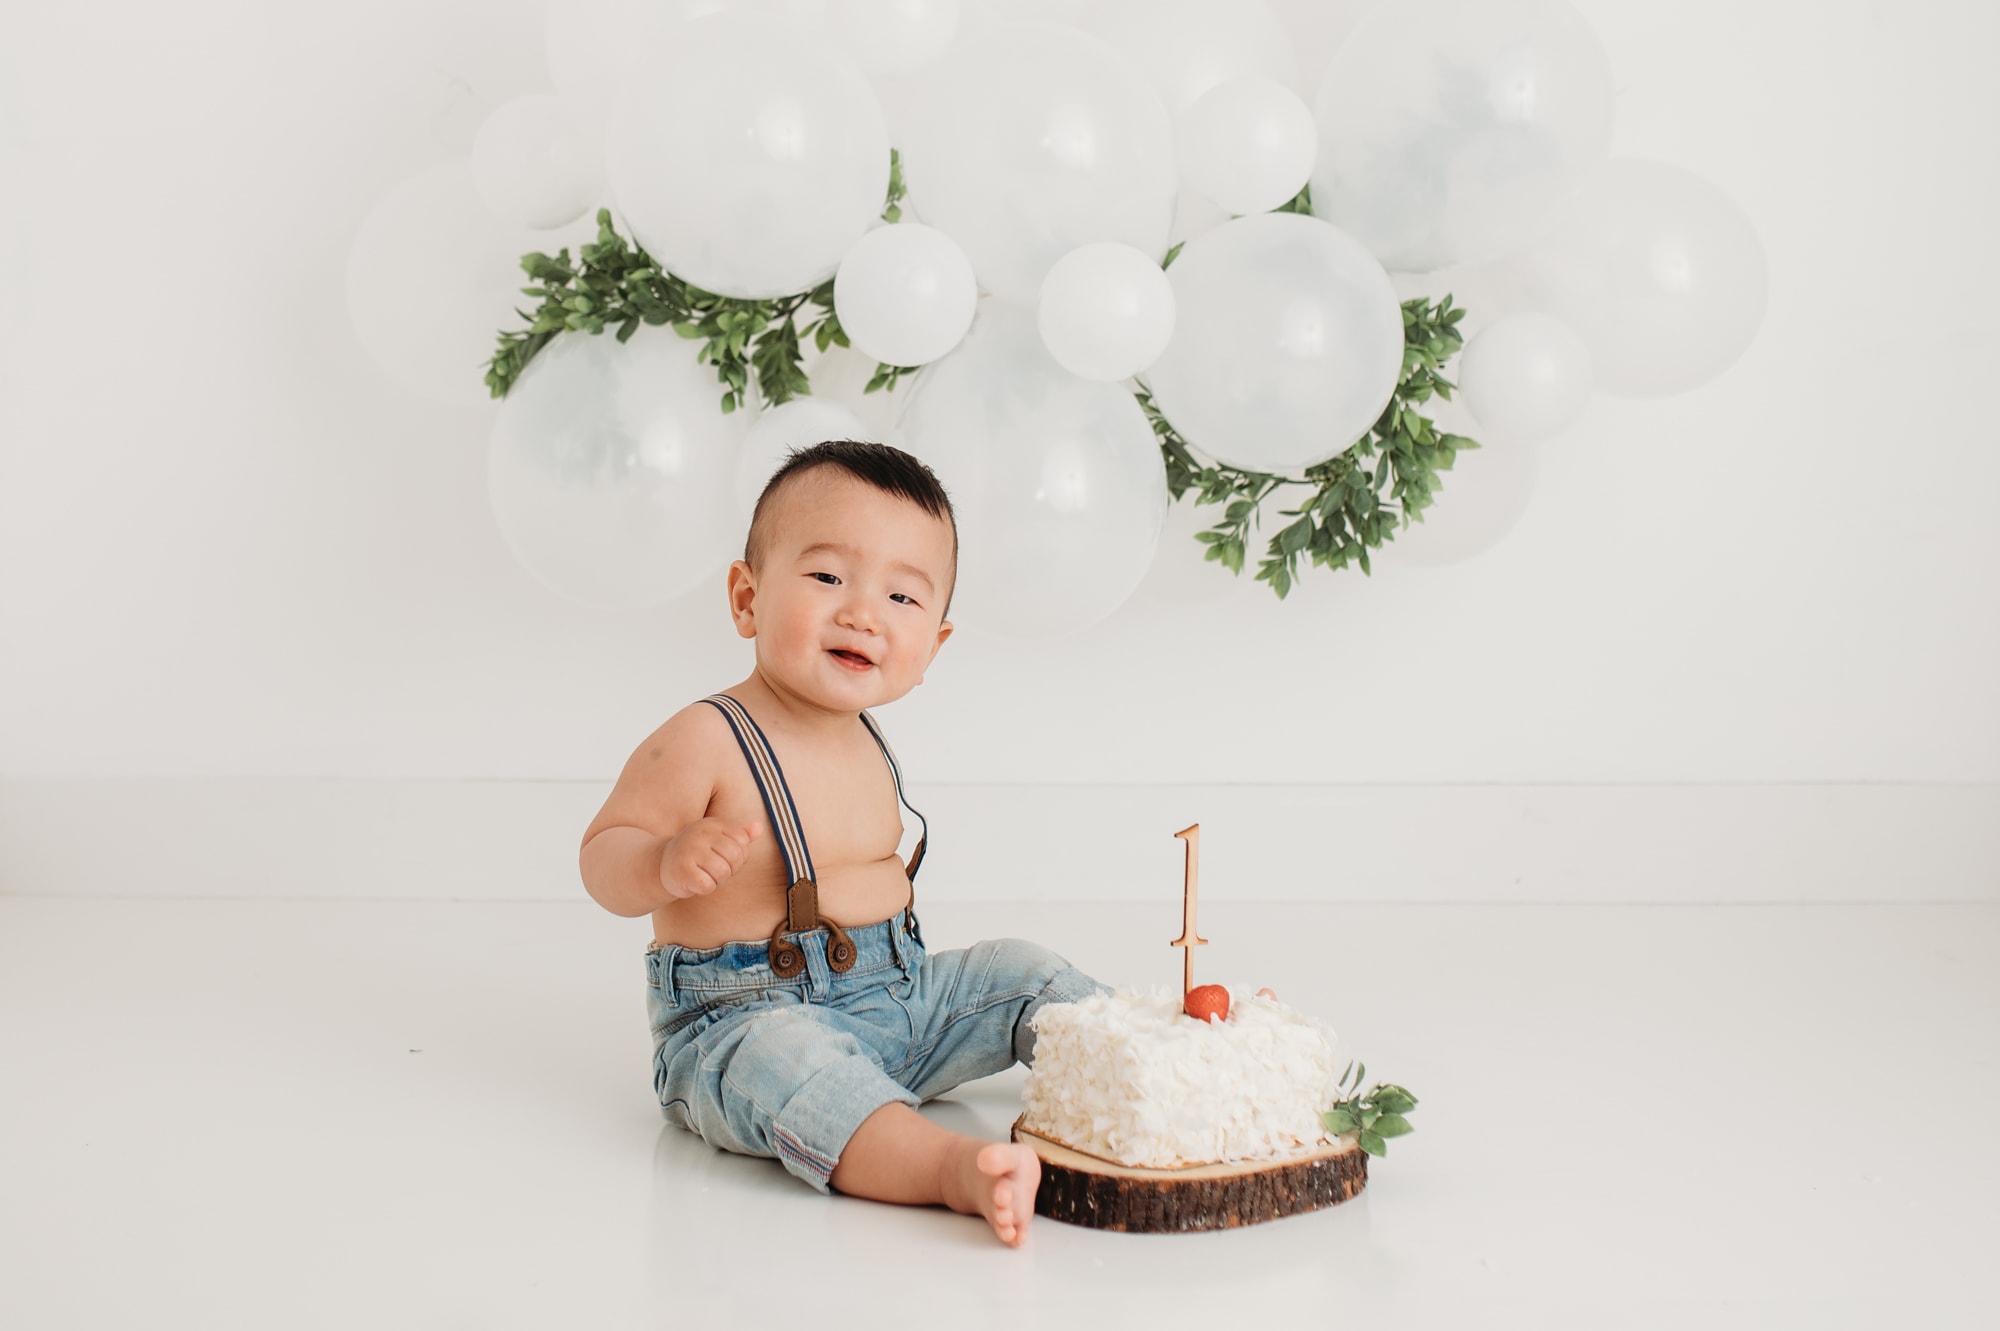 Asian baby smiles at the camera during cake smash decorated with white ballon garland with green leaves.